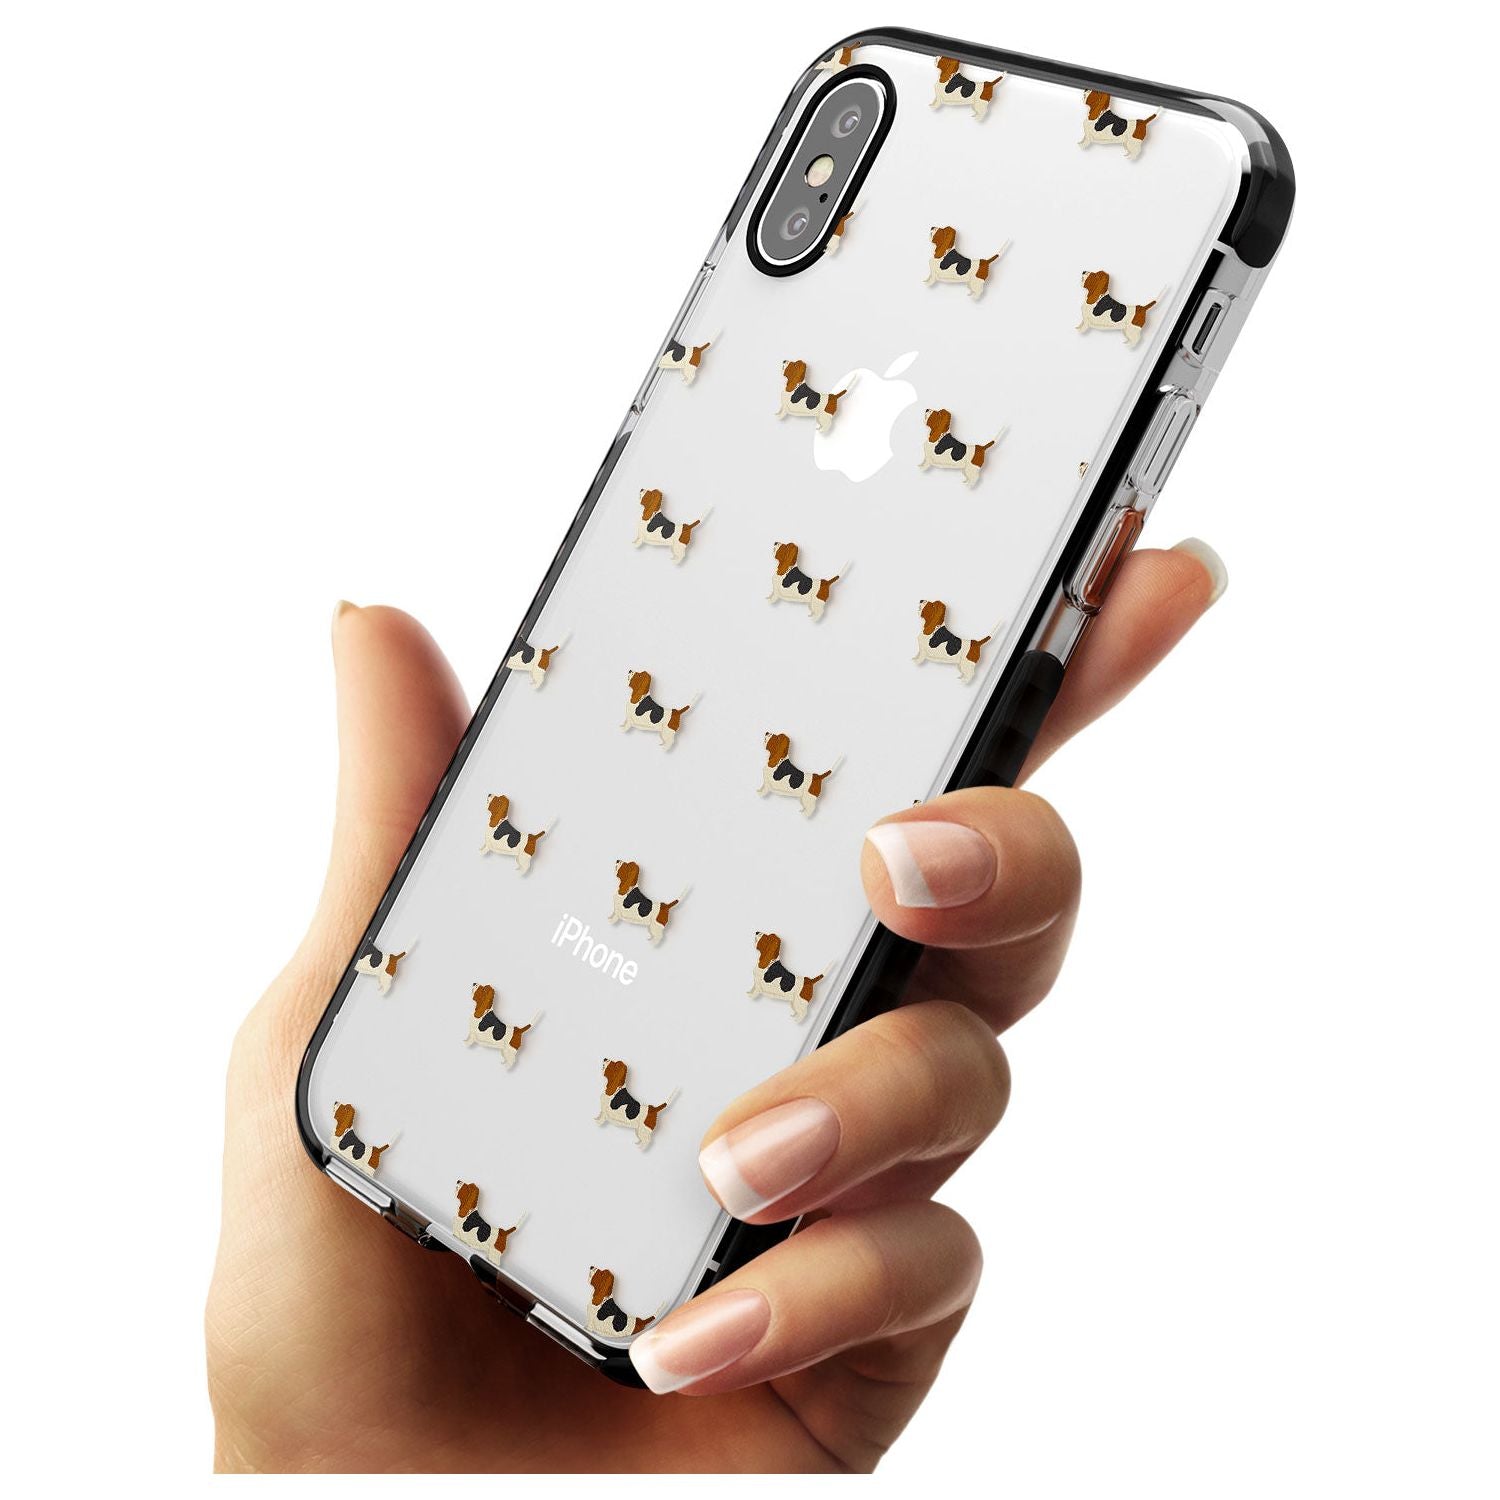 . Basset Hound Dog Pattern Clear Black Impact Phone Case for iPhone X XS Max XR